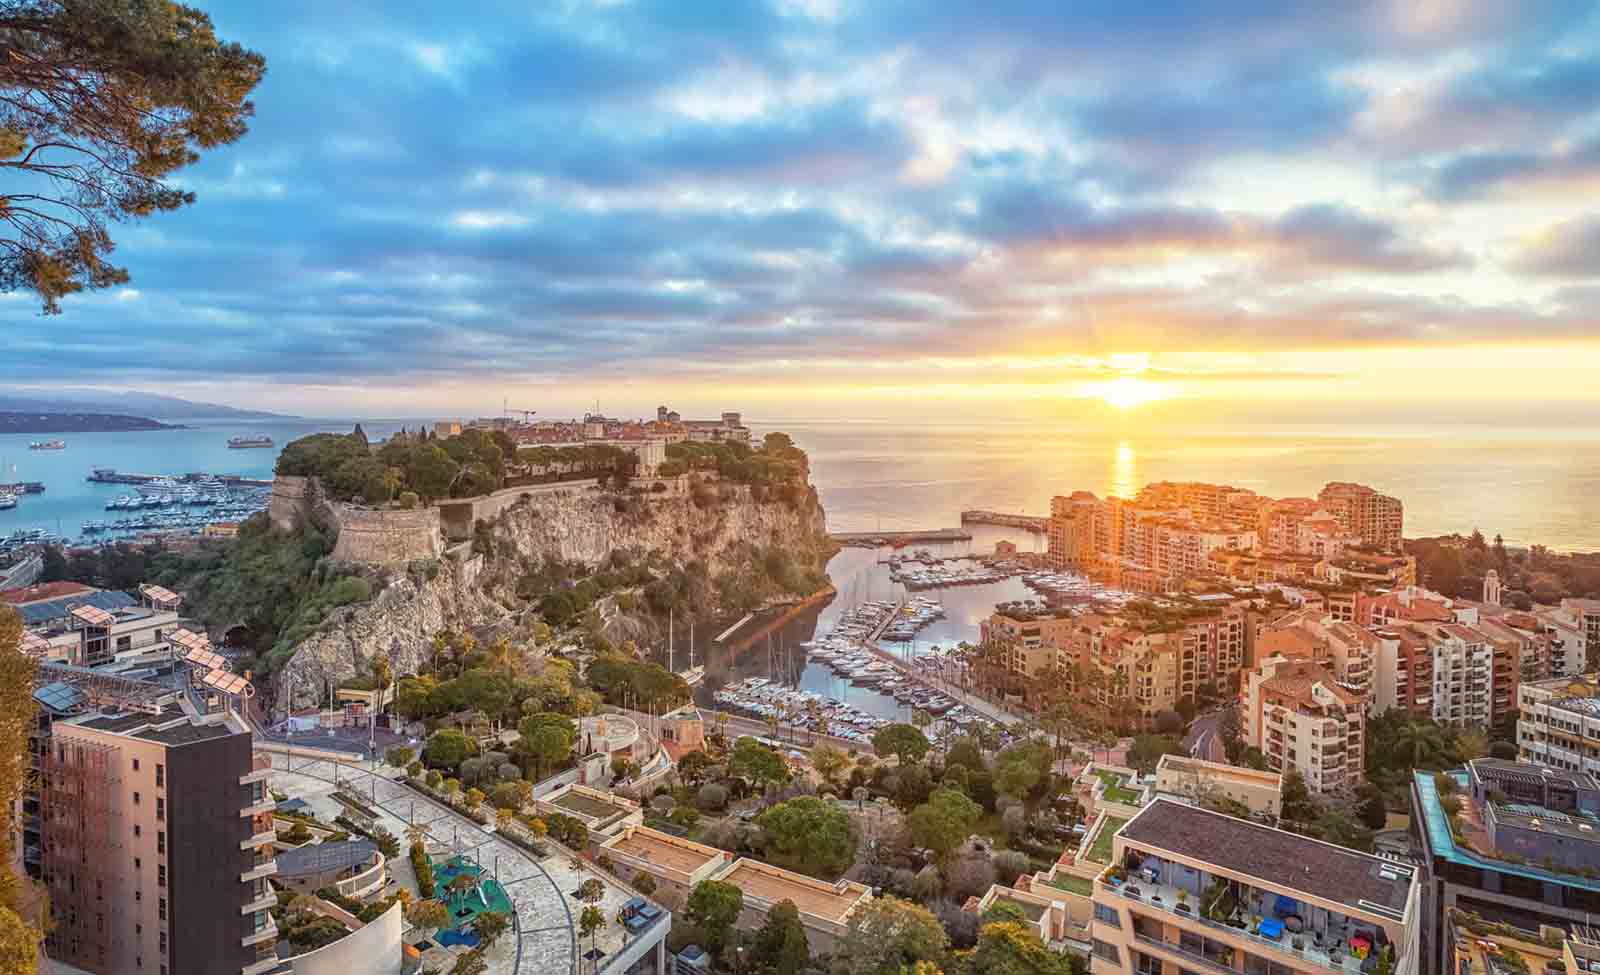 Monaco is the city with highest density of millionaires in the world